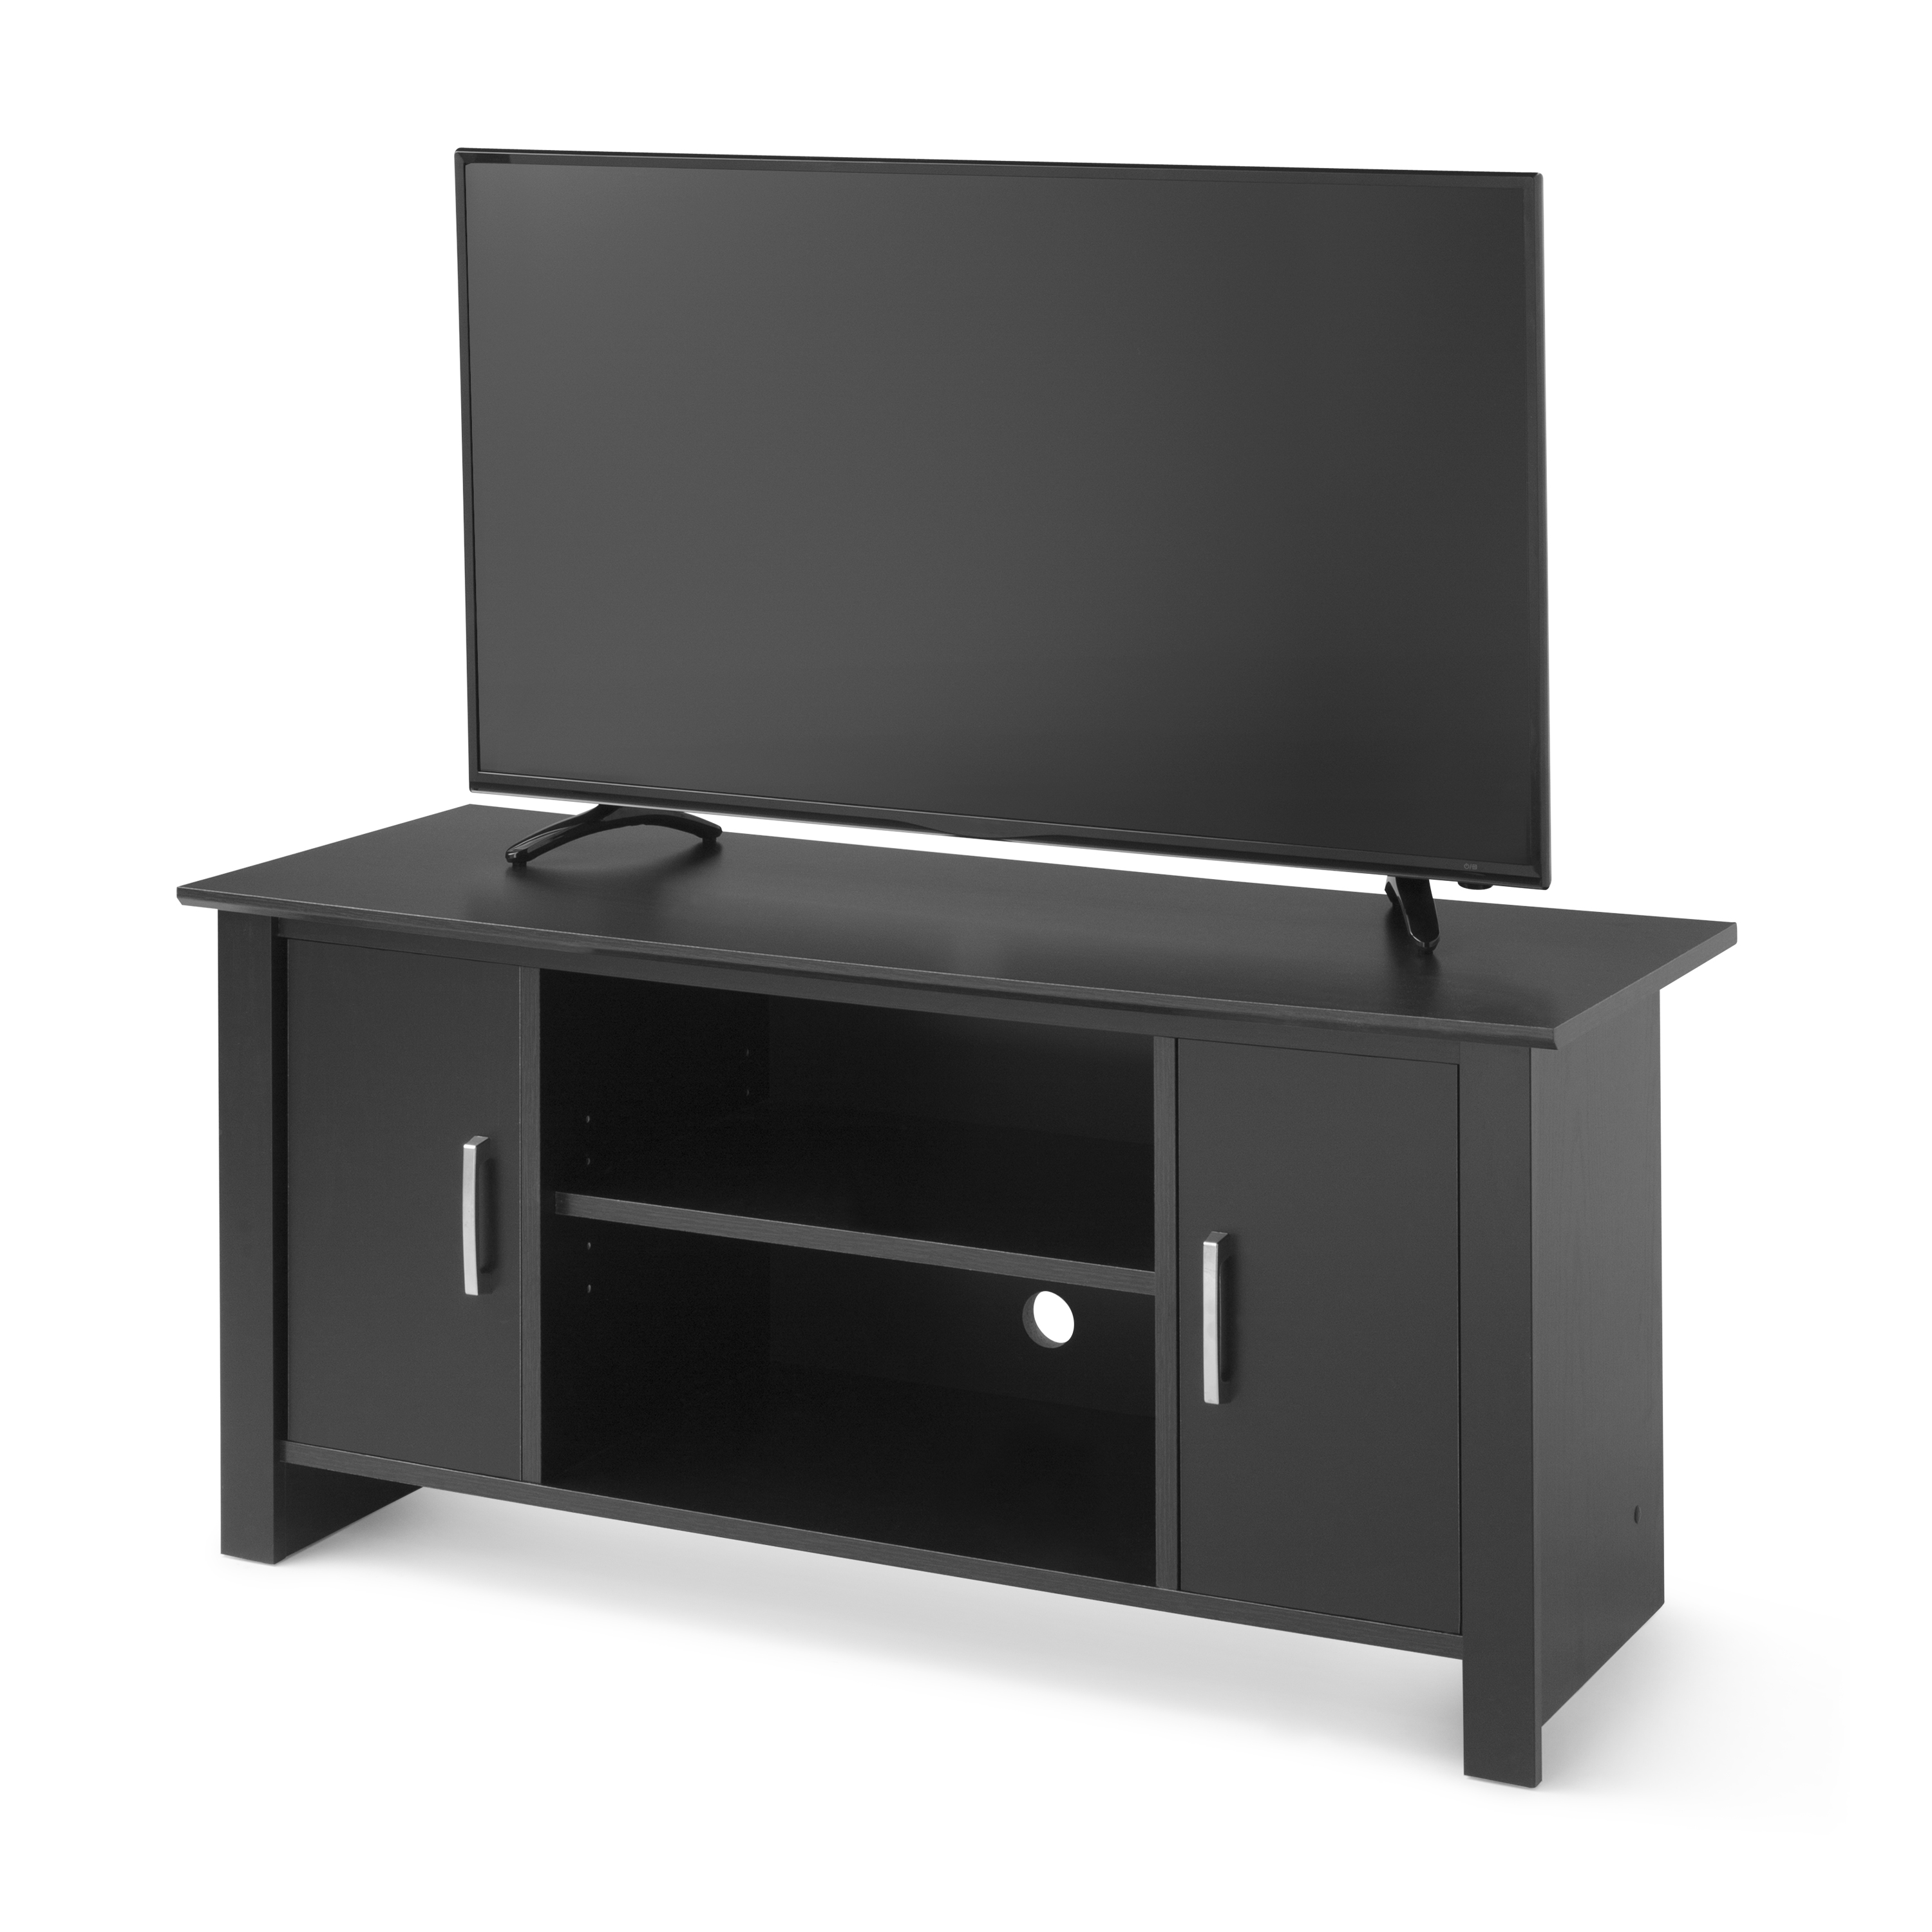 Mainstays TV Stand for Flat Screen TVs up to 47", Blackwood Finish - image 3 of 5